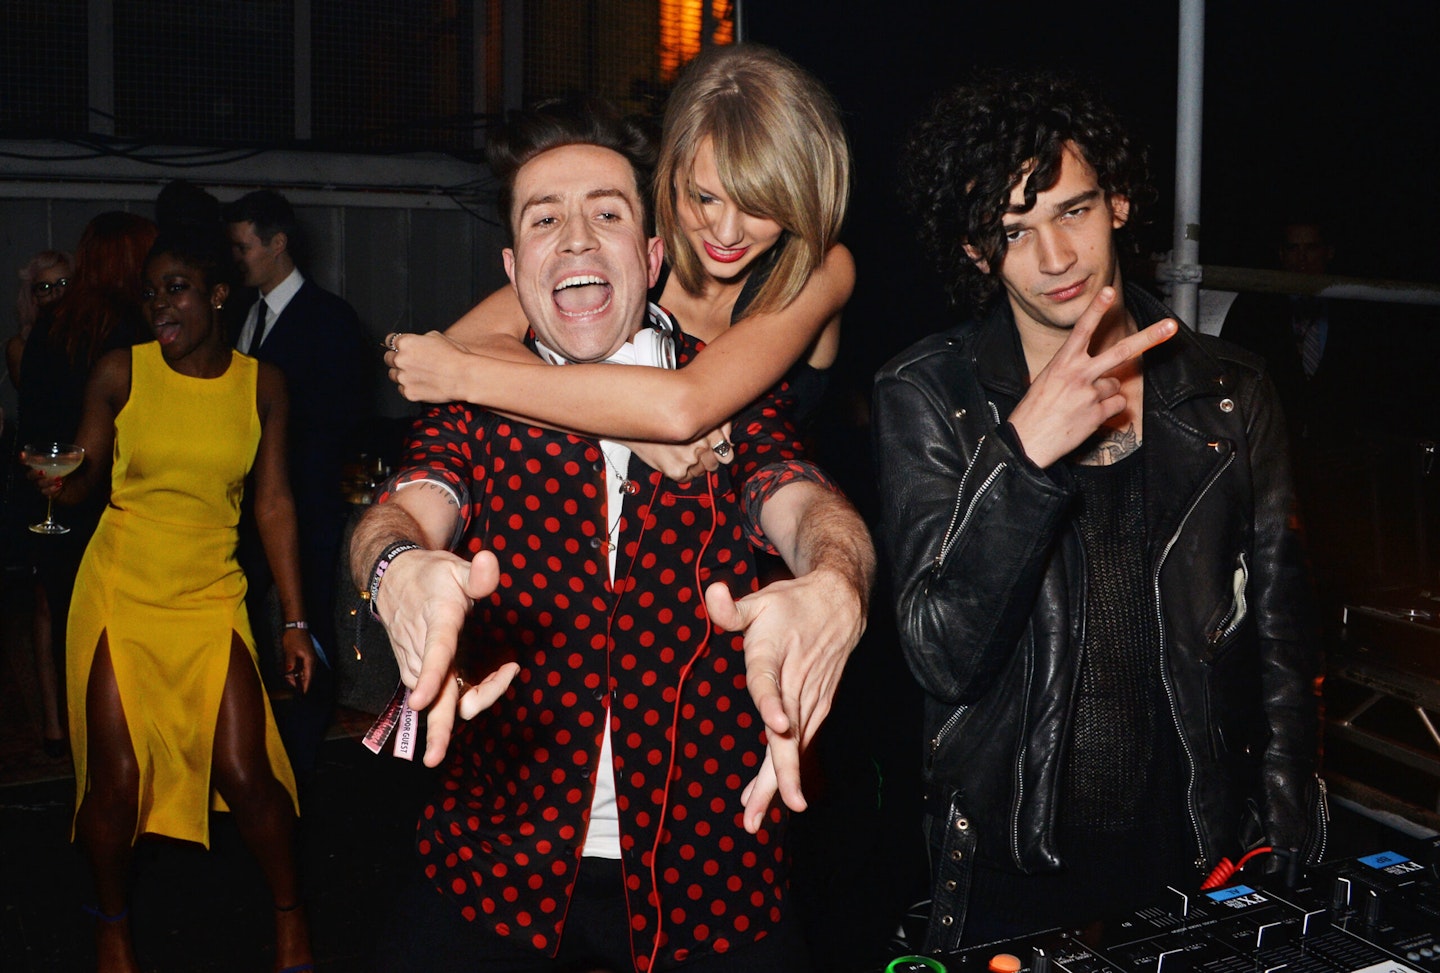 Taylor Swift hugging Nick Grimshaw while Matty Healy poses next to them